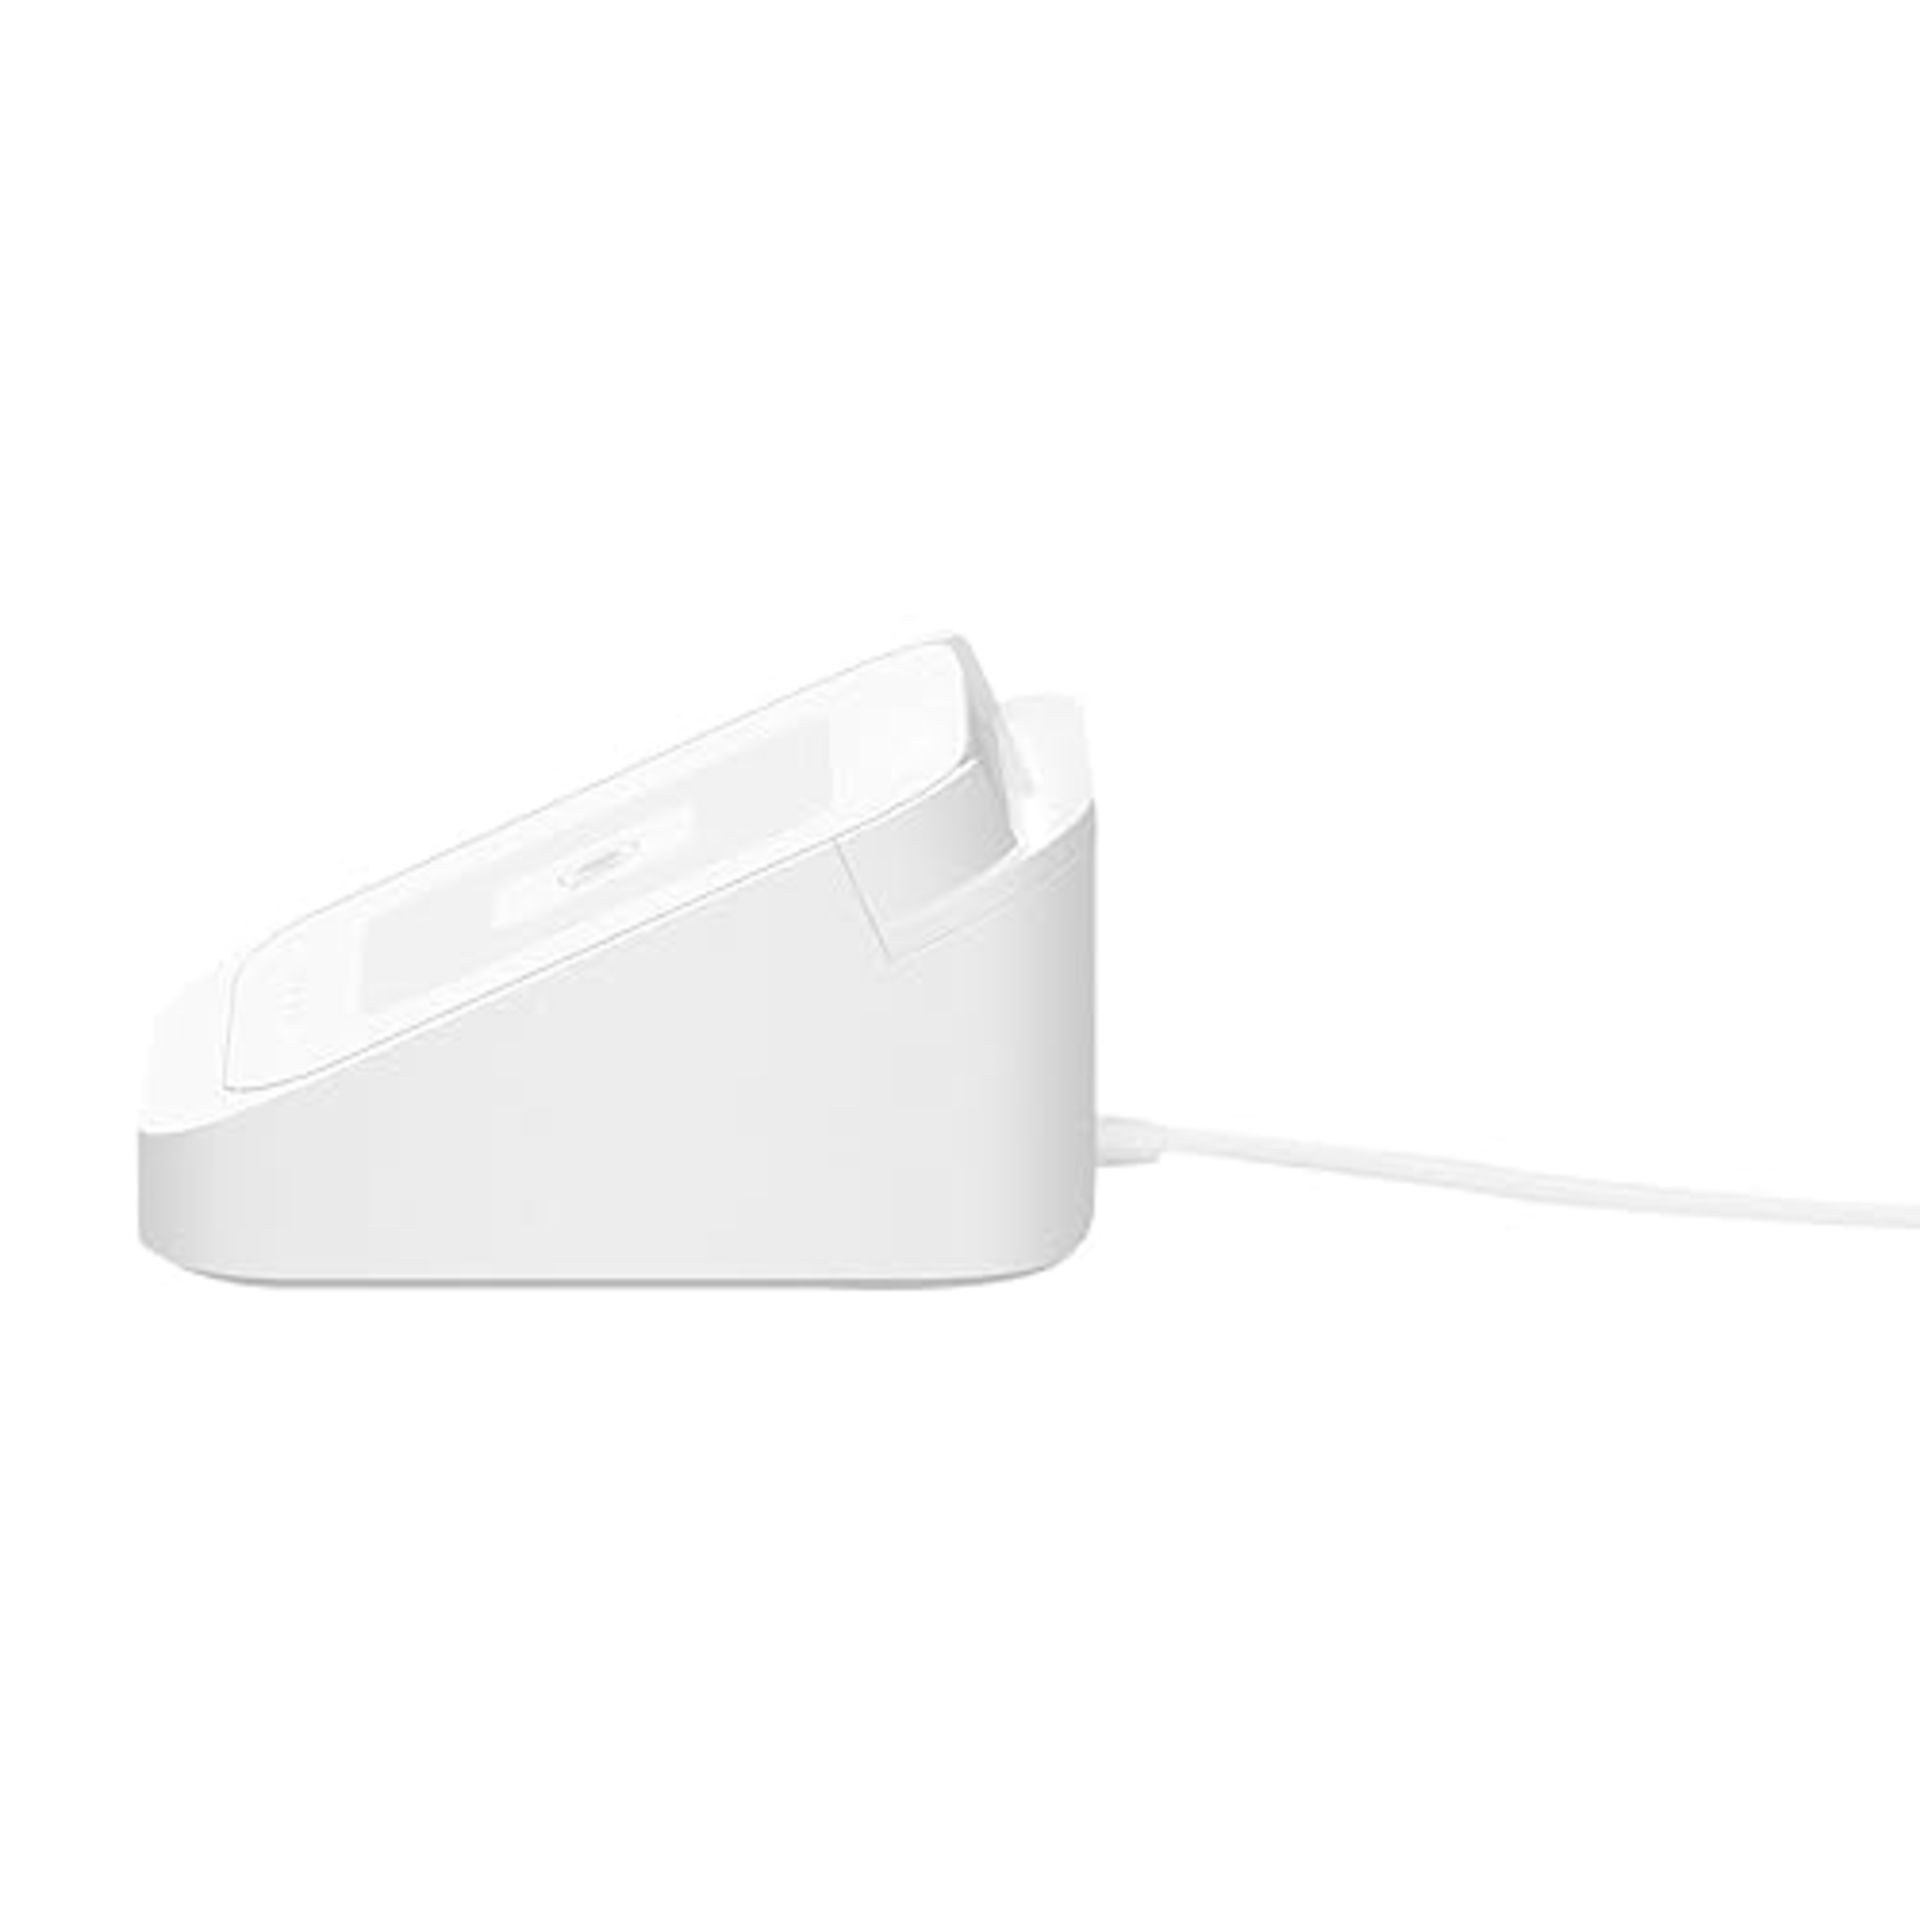 Square Dock - Keeps Square Reader Charged for Contactless, Chip & PIN payments